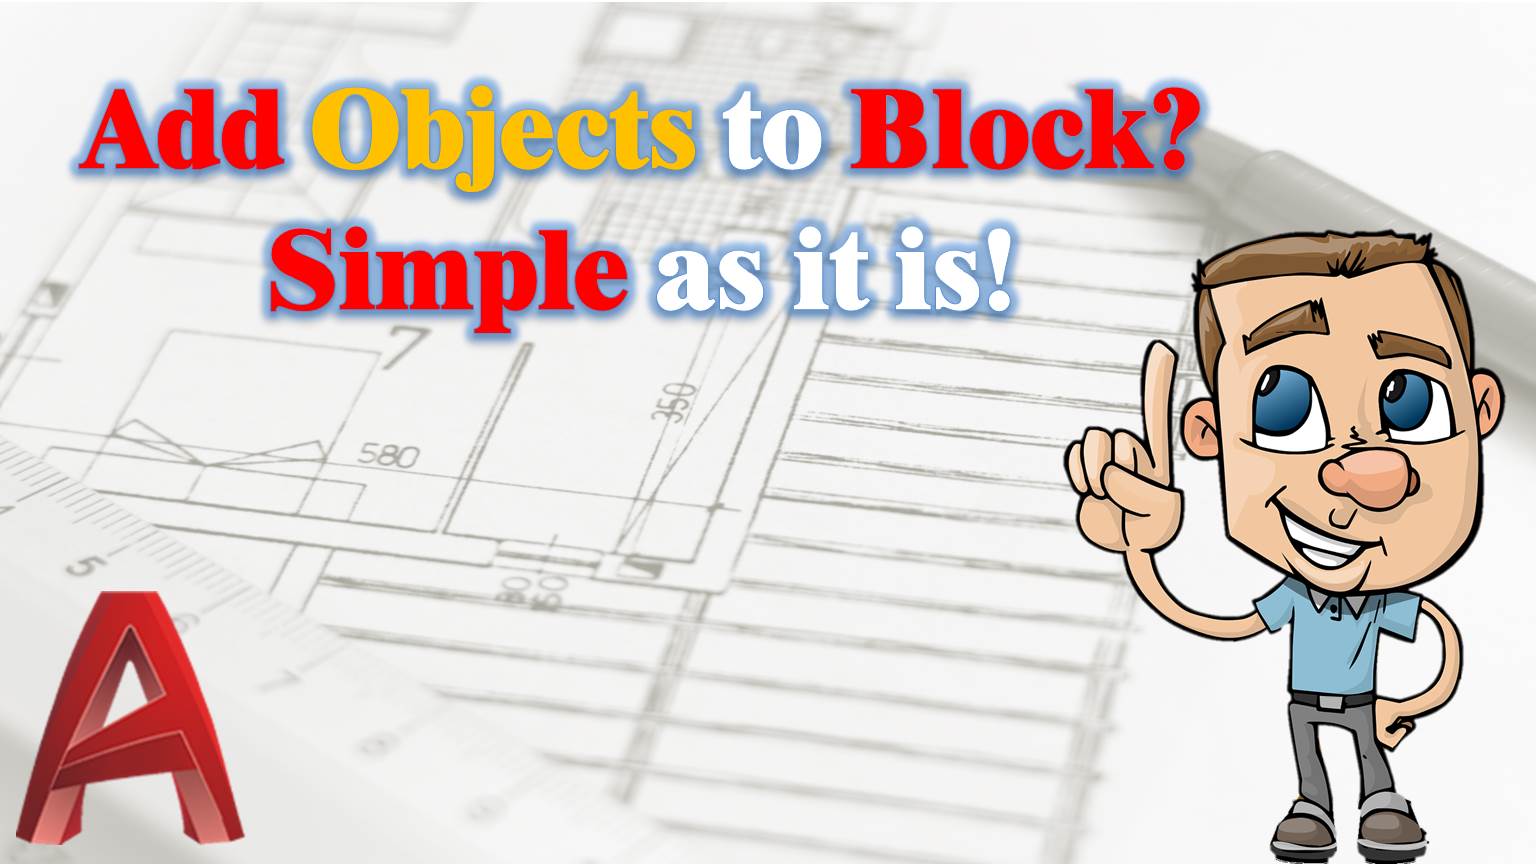 Adding objects to existing block